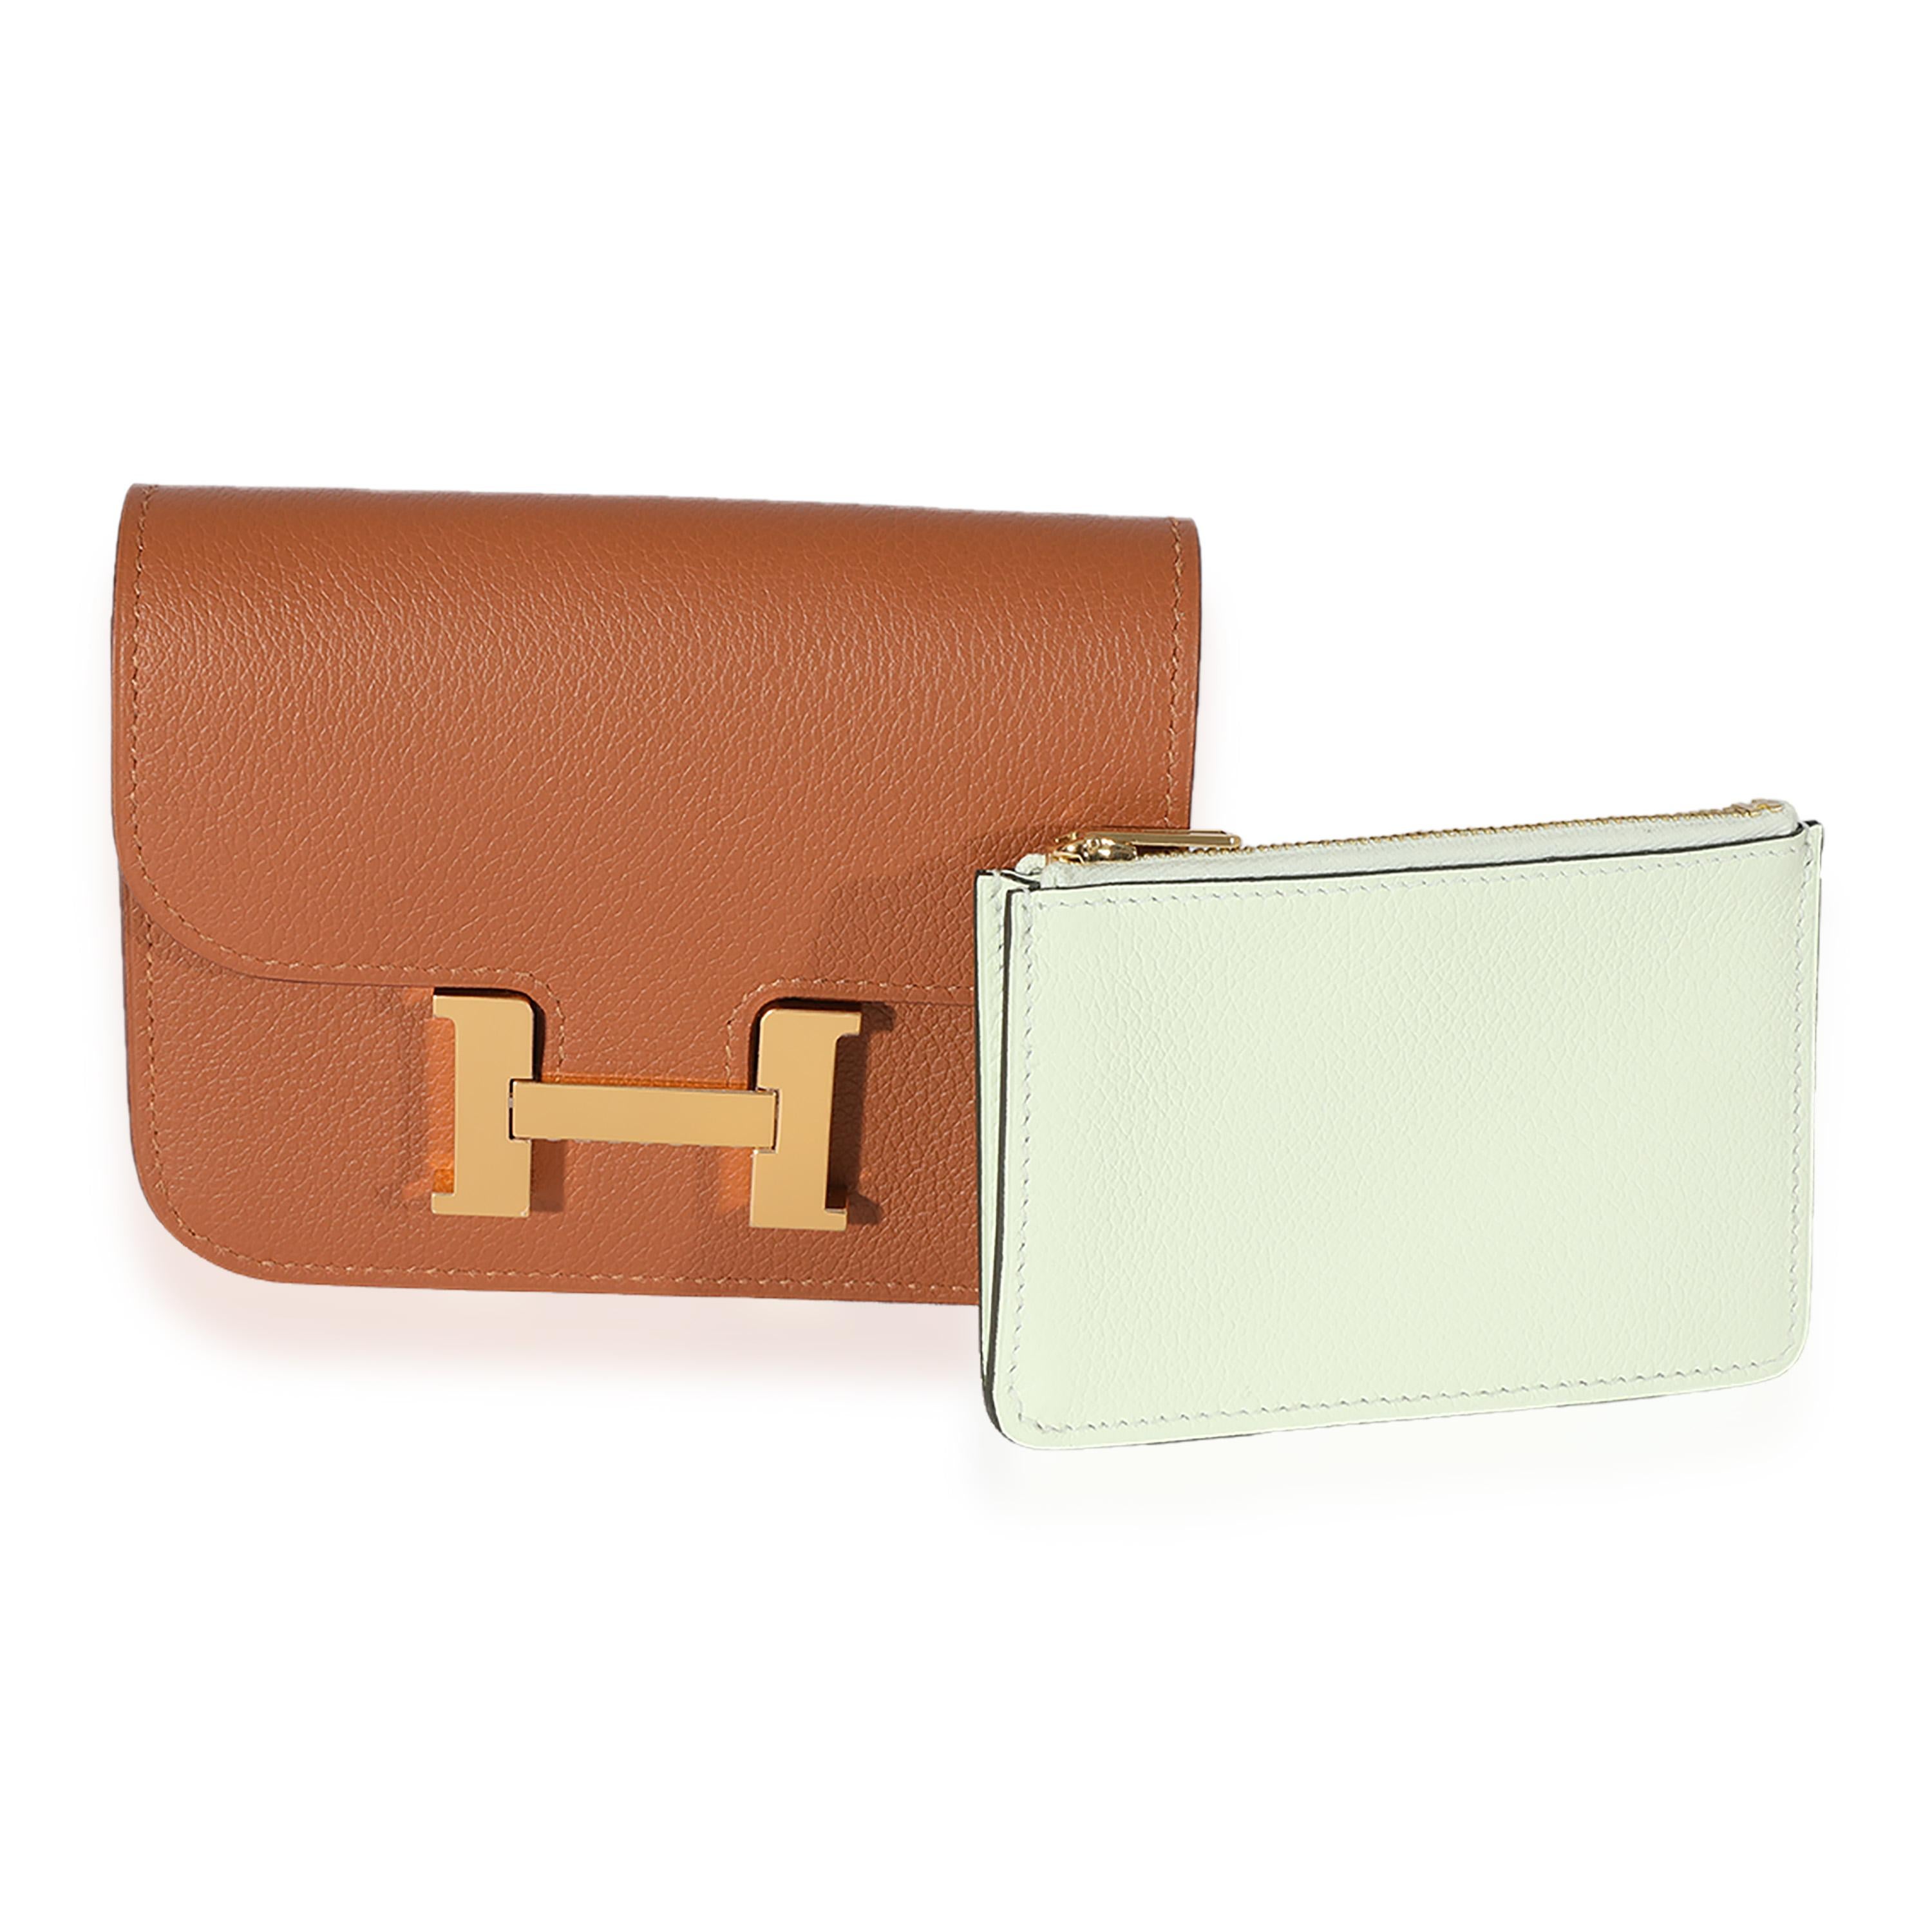 Listing Title: Hermès Gold Vert Fizz Evercolor Bicolore Constance Slim Compact GHW
SKU: 125394
MSRP: 2675.00
Condition: Pre-owned 
Handbag Condition: Mint
Condition Comments: Mint Condition. Plastic on some hardware. No visible signs of wear. Final